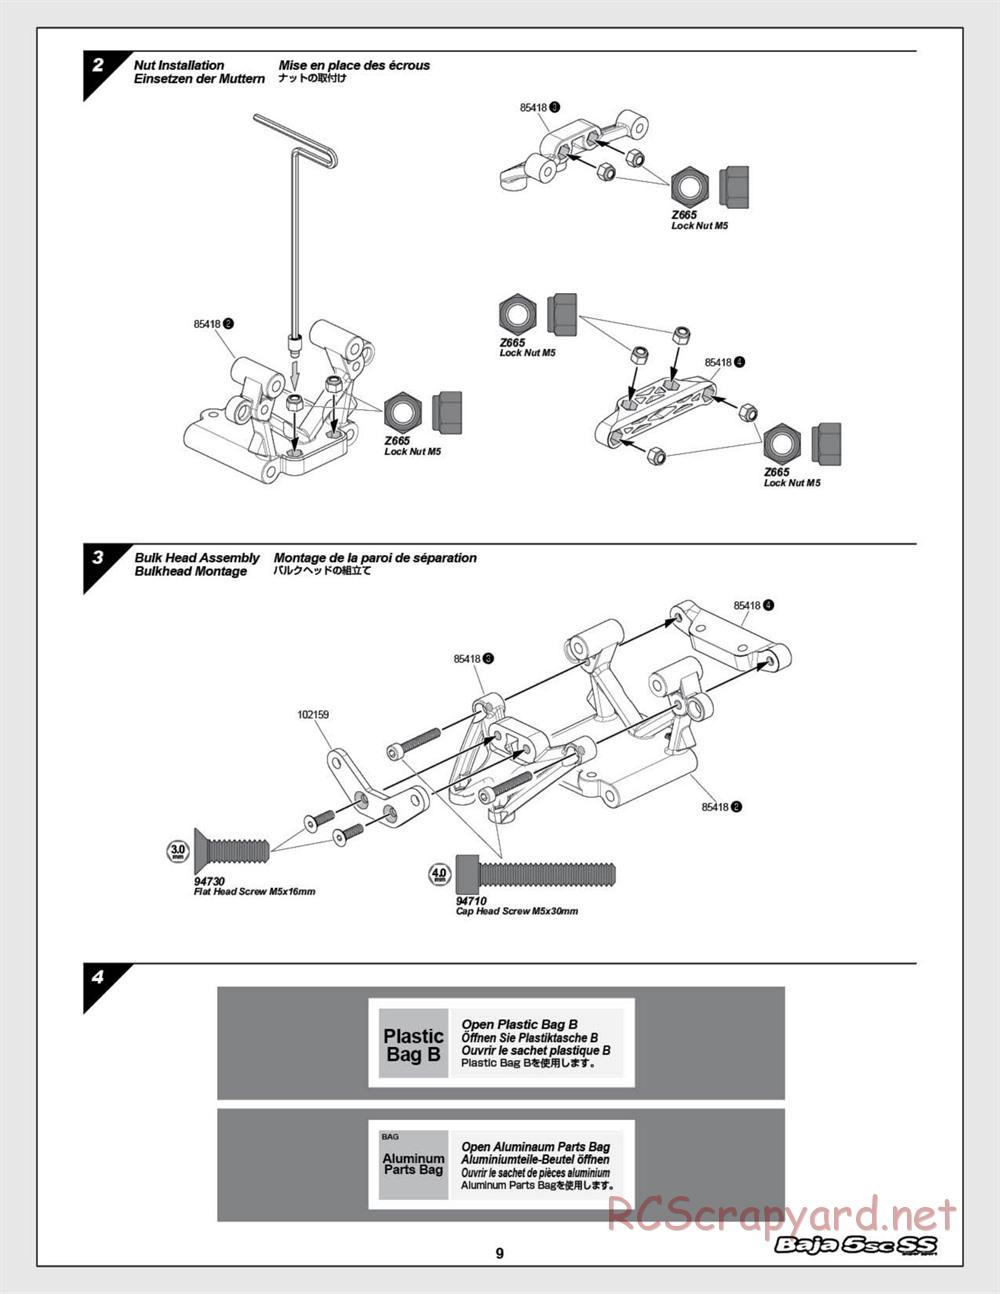 HPI - Baja 5SC SS - Exploded View - Page 9